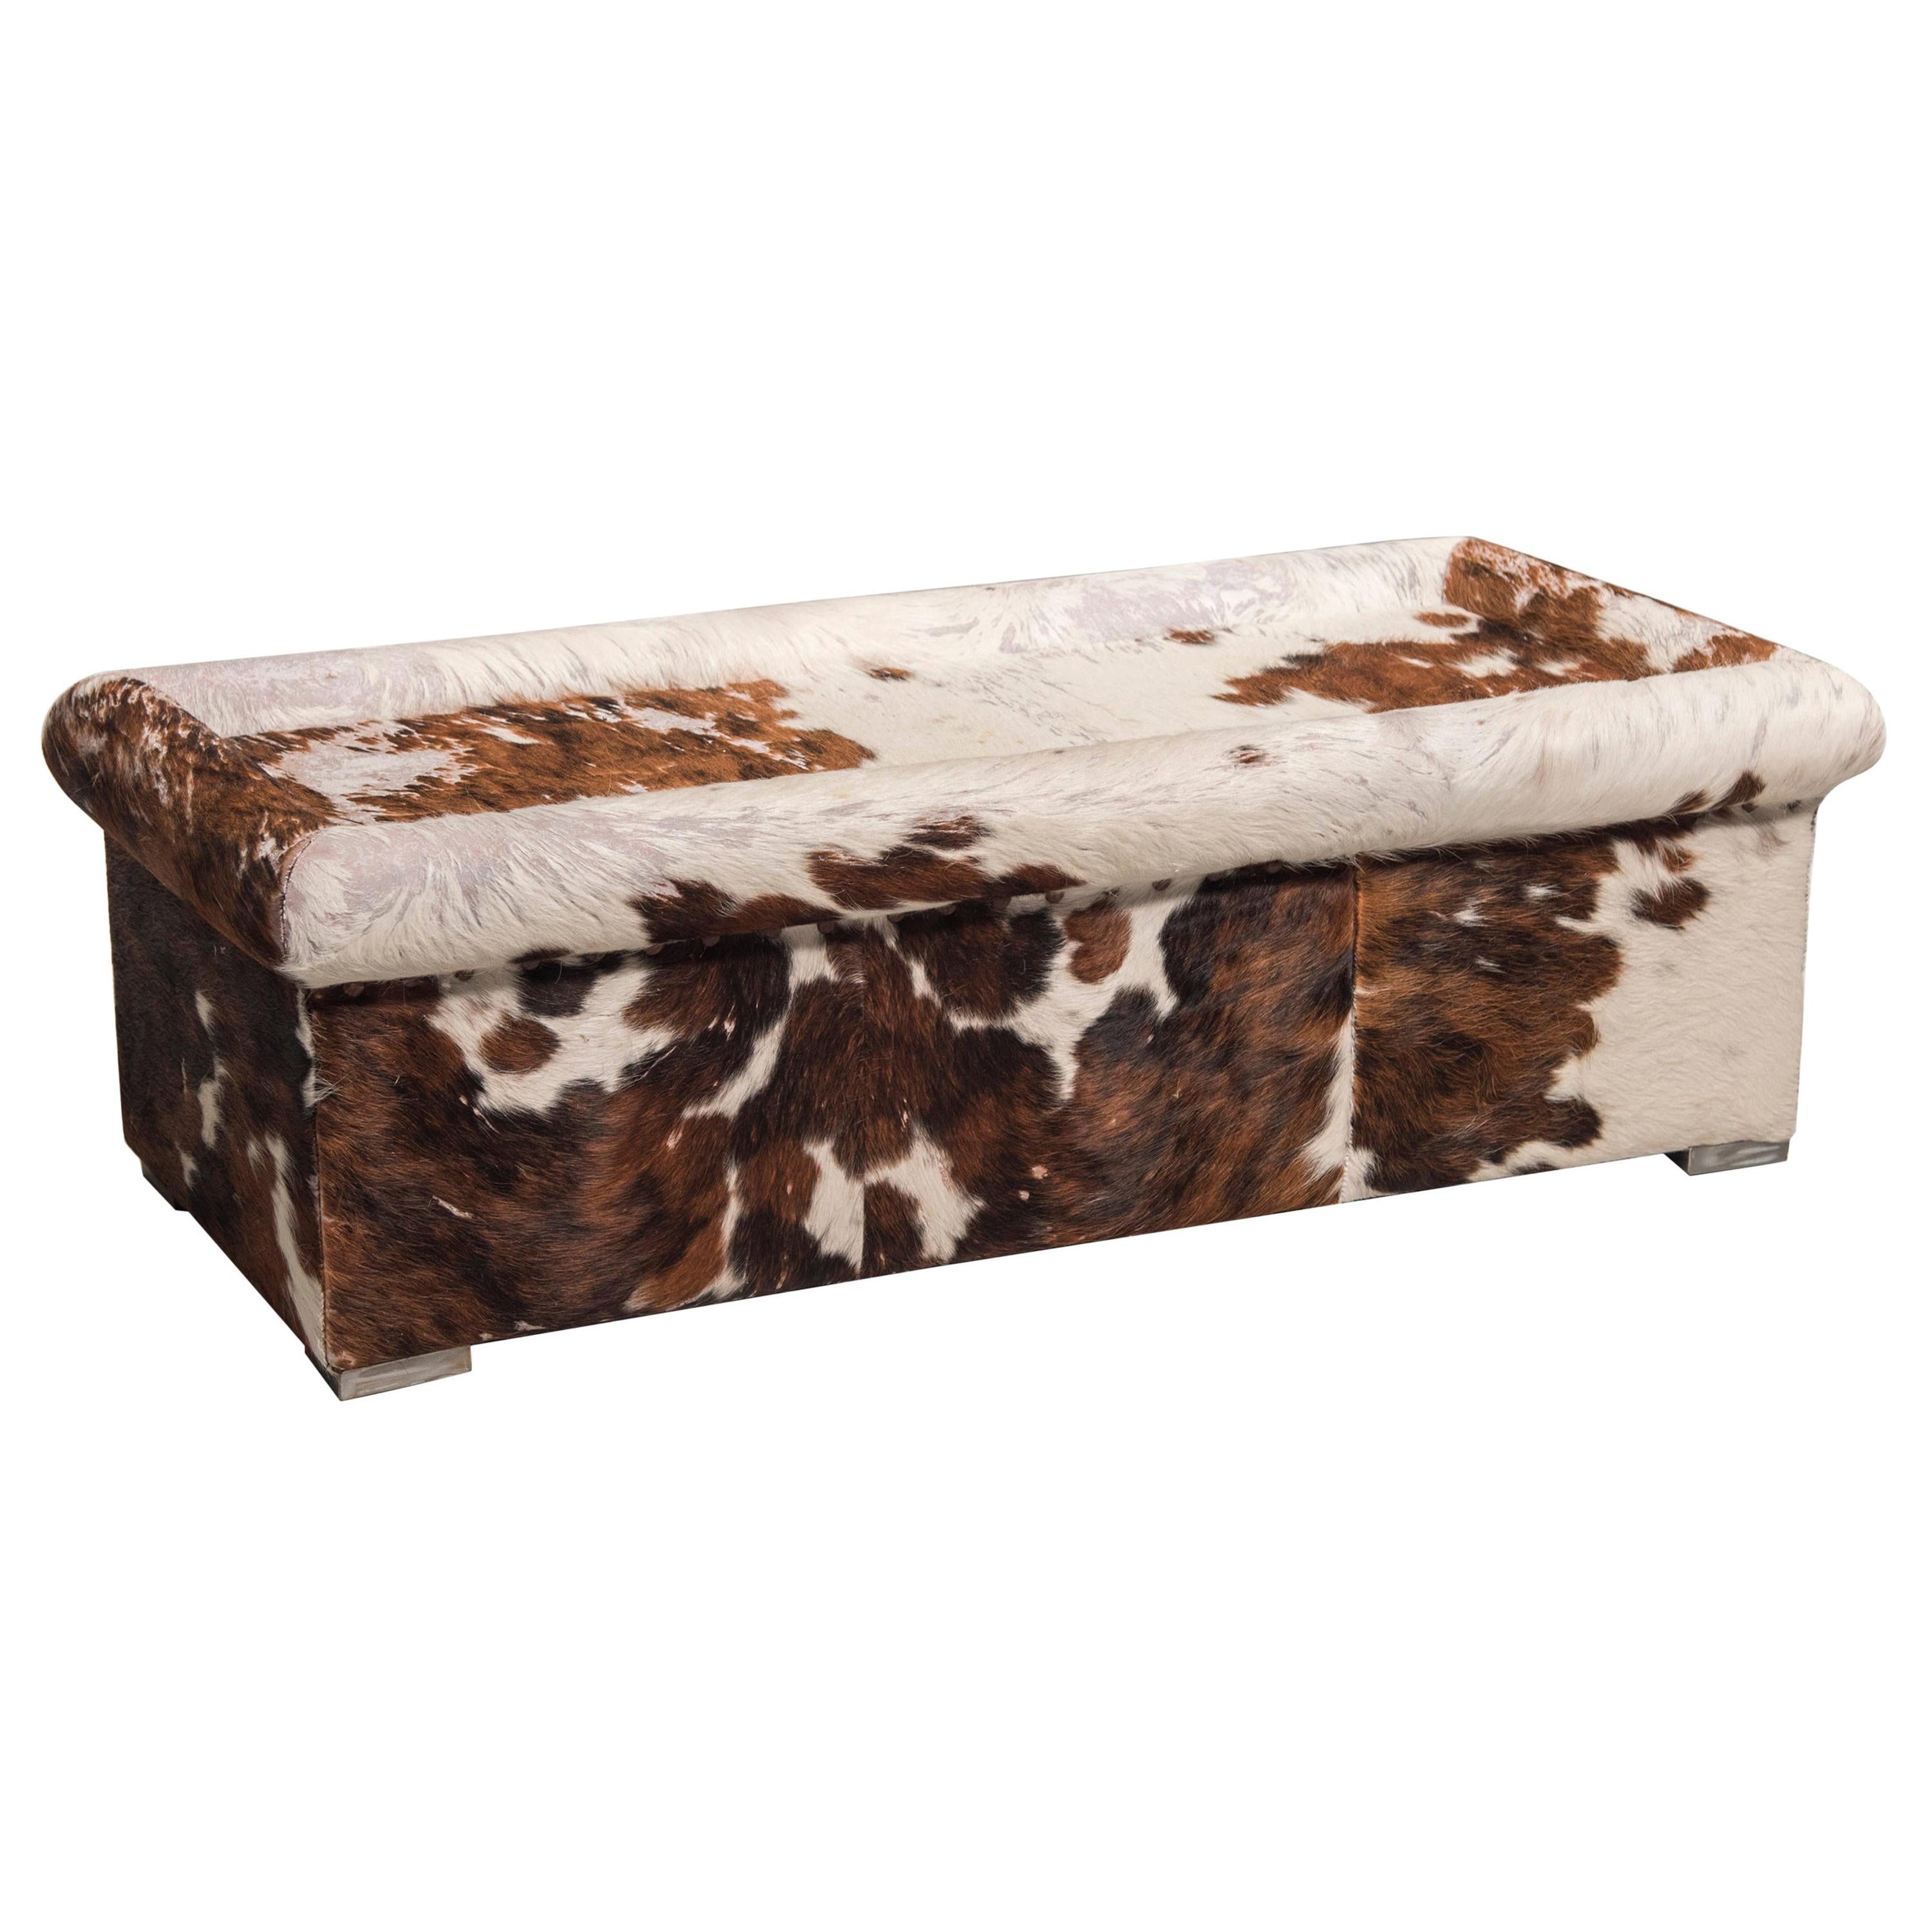 Baxter Brown and White Cow Fur Leather Ottoman or Coffee Table, Italy, 1990s